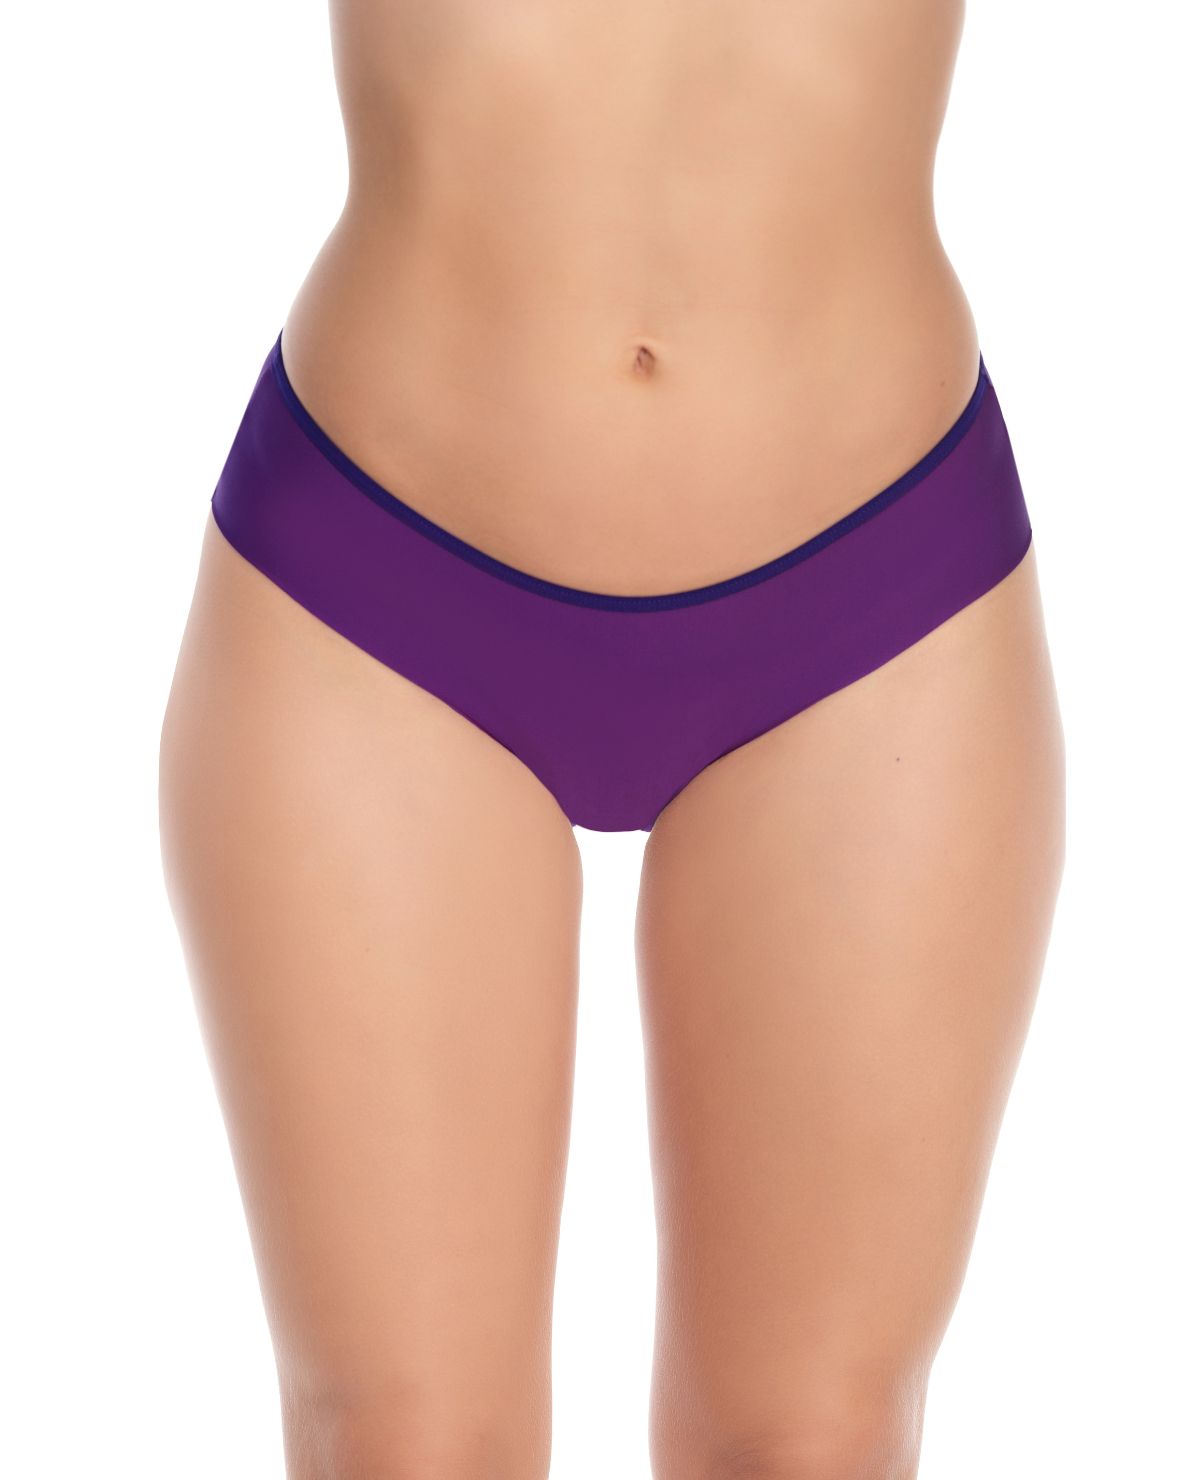 Panty_Ropa Interior colombia_St Even_48692